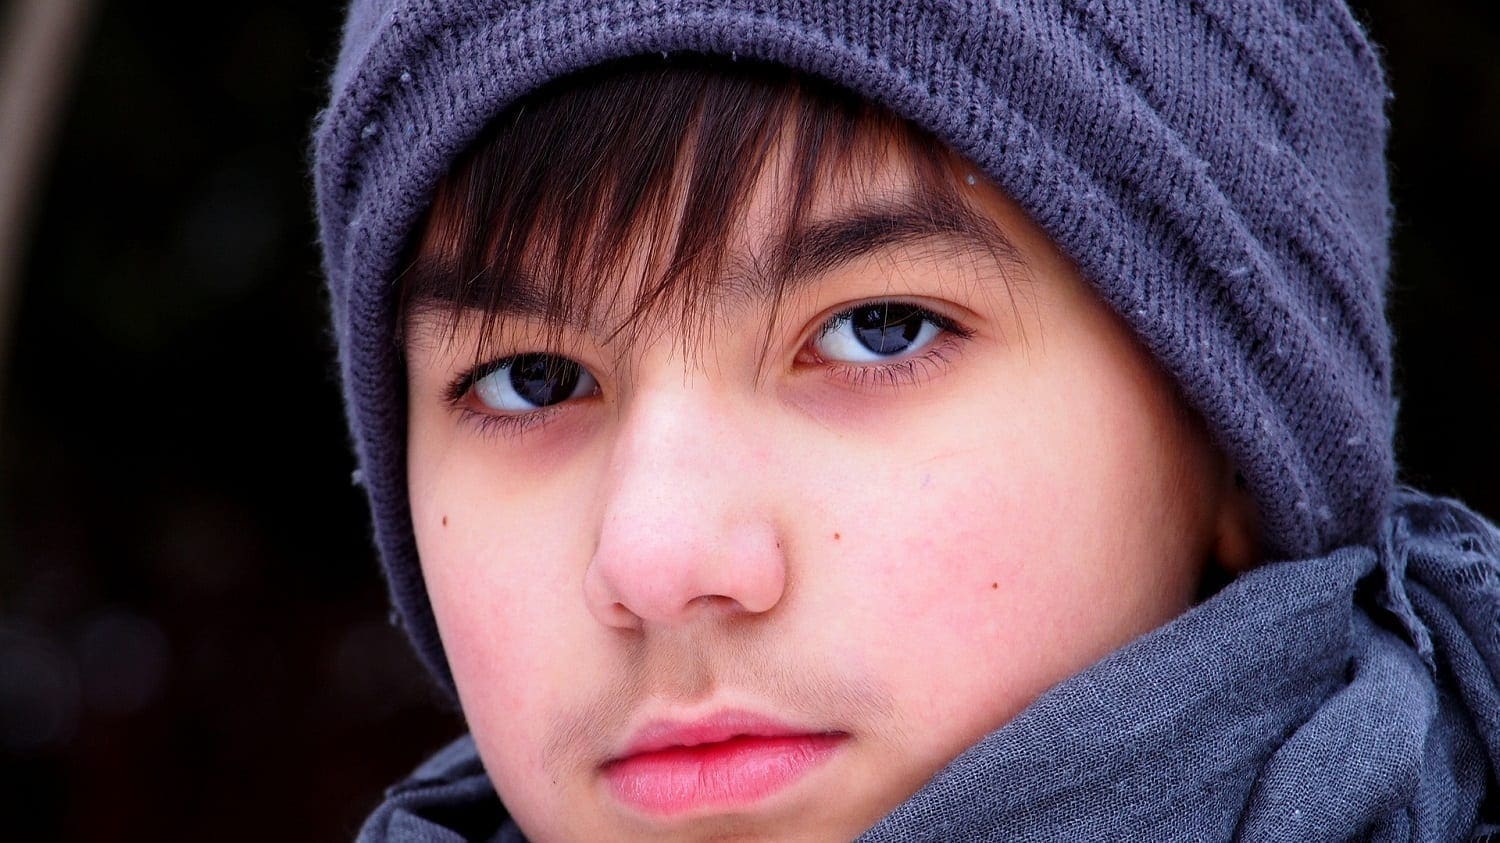 Teen boy with brown eyes and knit cap: Image by Ferenc Barna from Pixabay